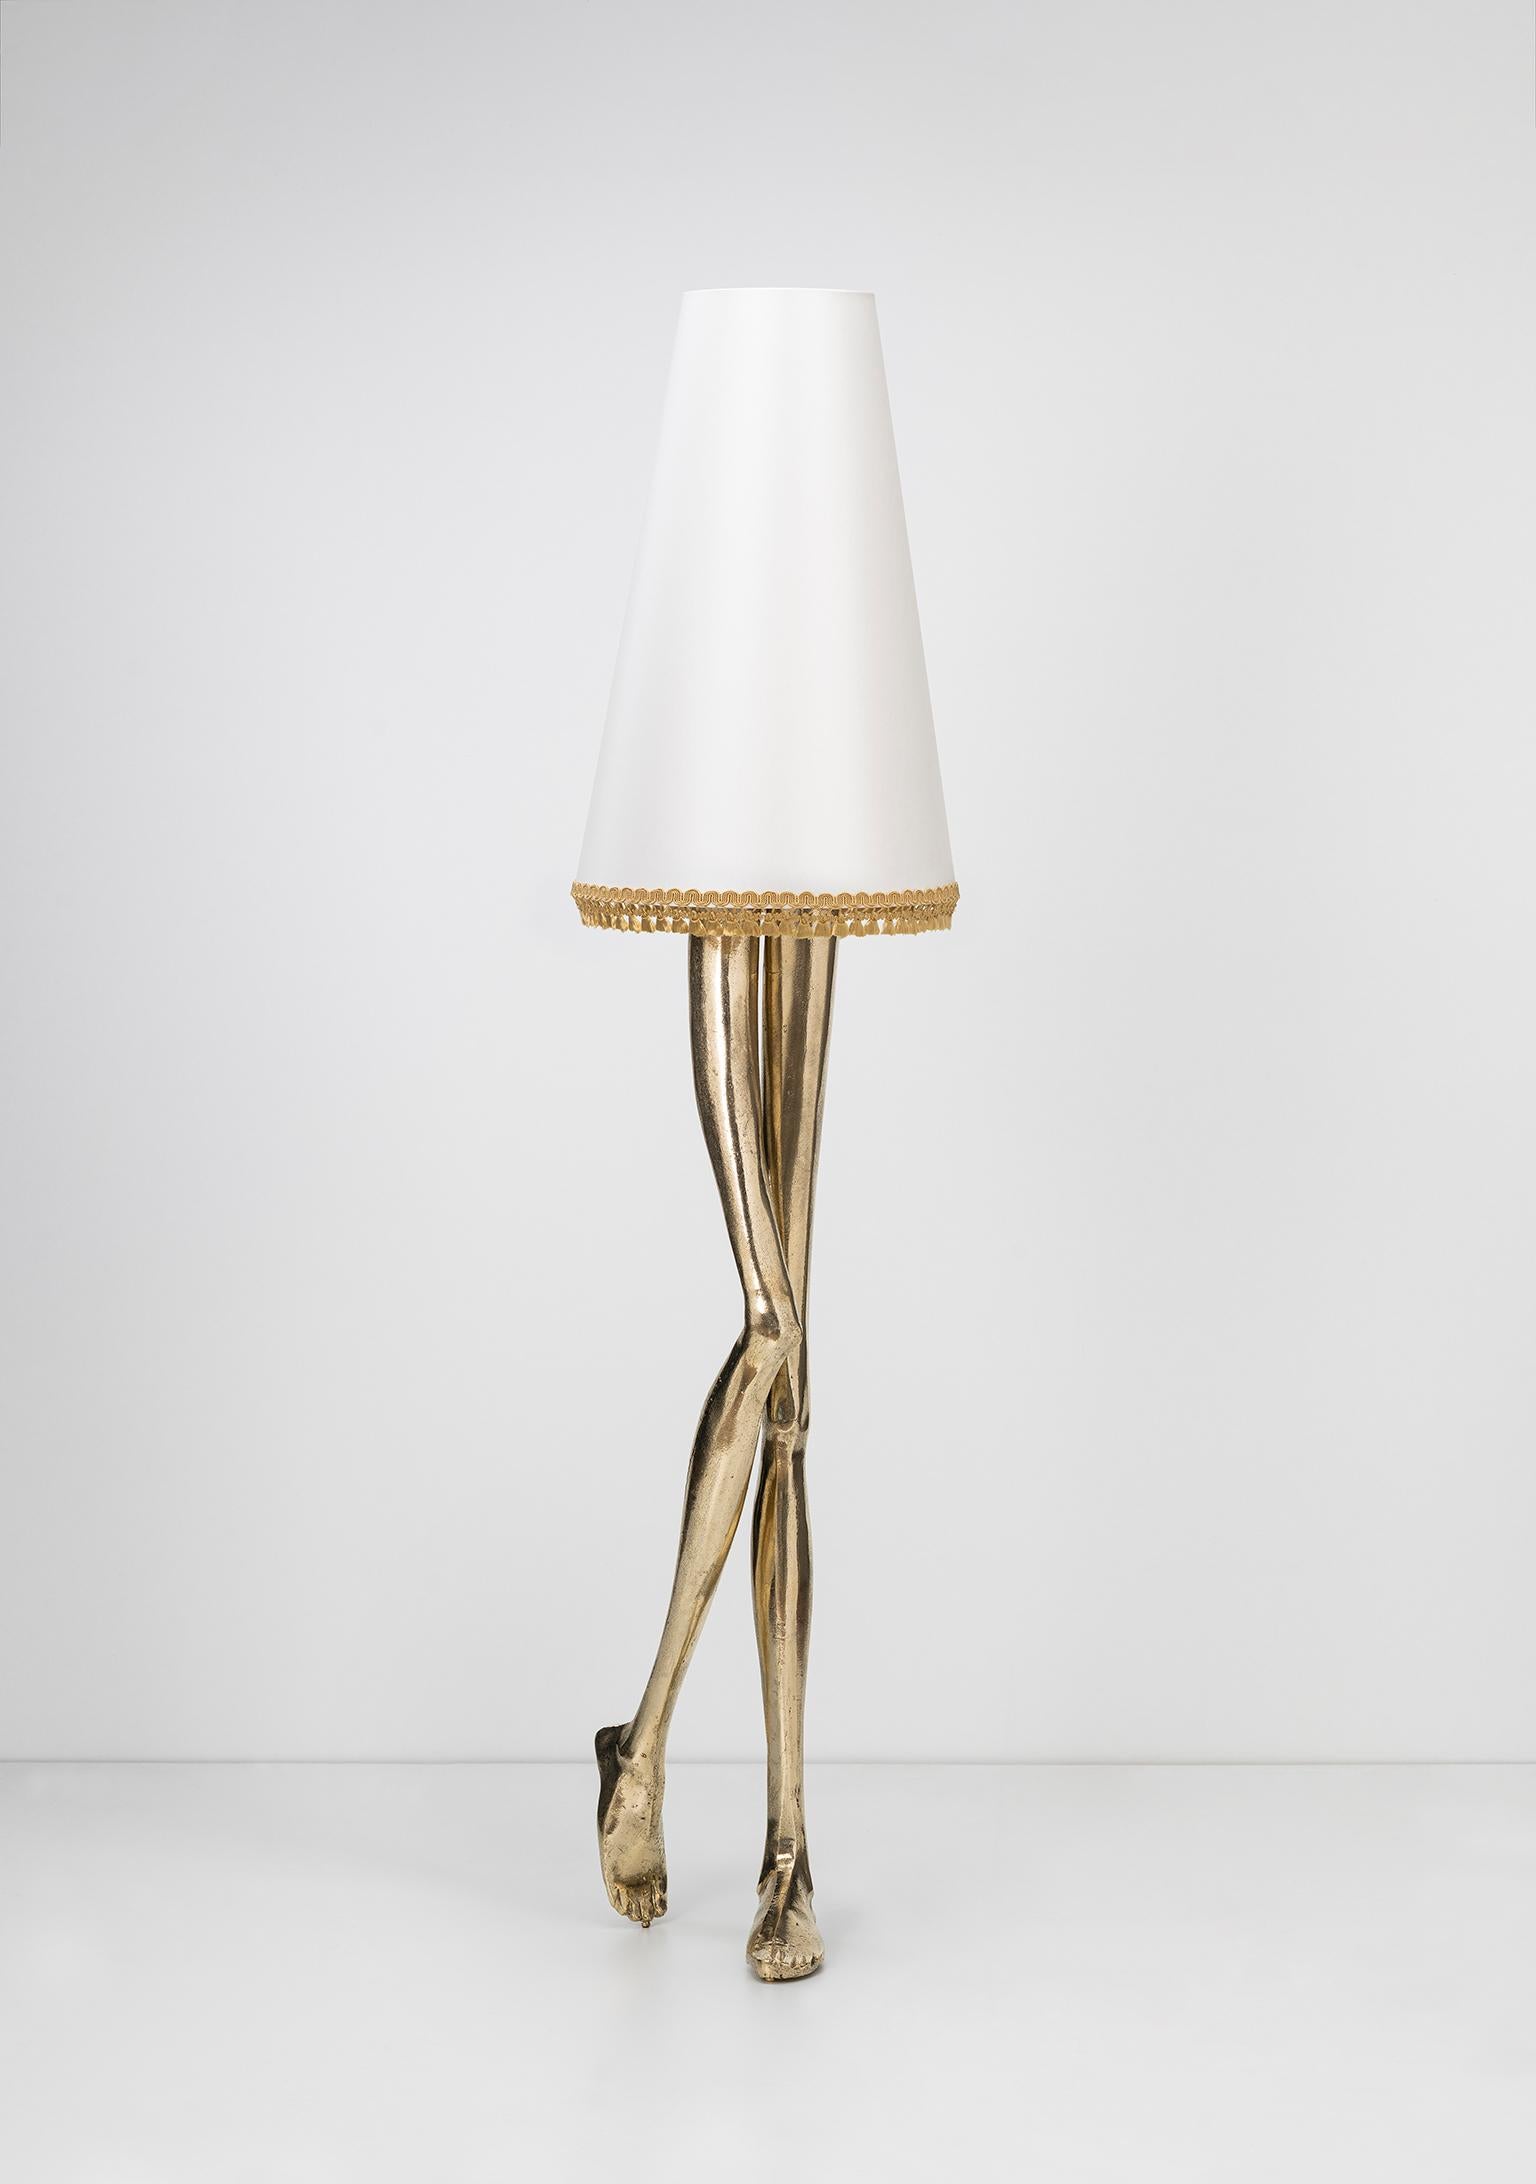 Inspiration: 
Marilyn Monroe, the sexiest Pin-up of the 1950s, inspired a piece of Art & Design. The design of the Monroe Lamp captures the essence of her image and the sensuality of her legs. The lampshade and the gold tassel fringe complement the